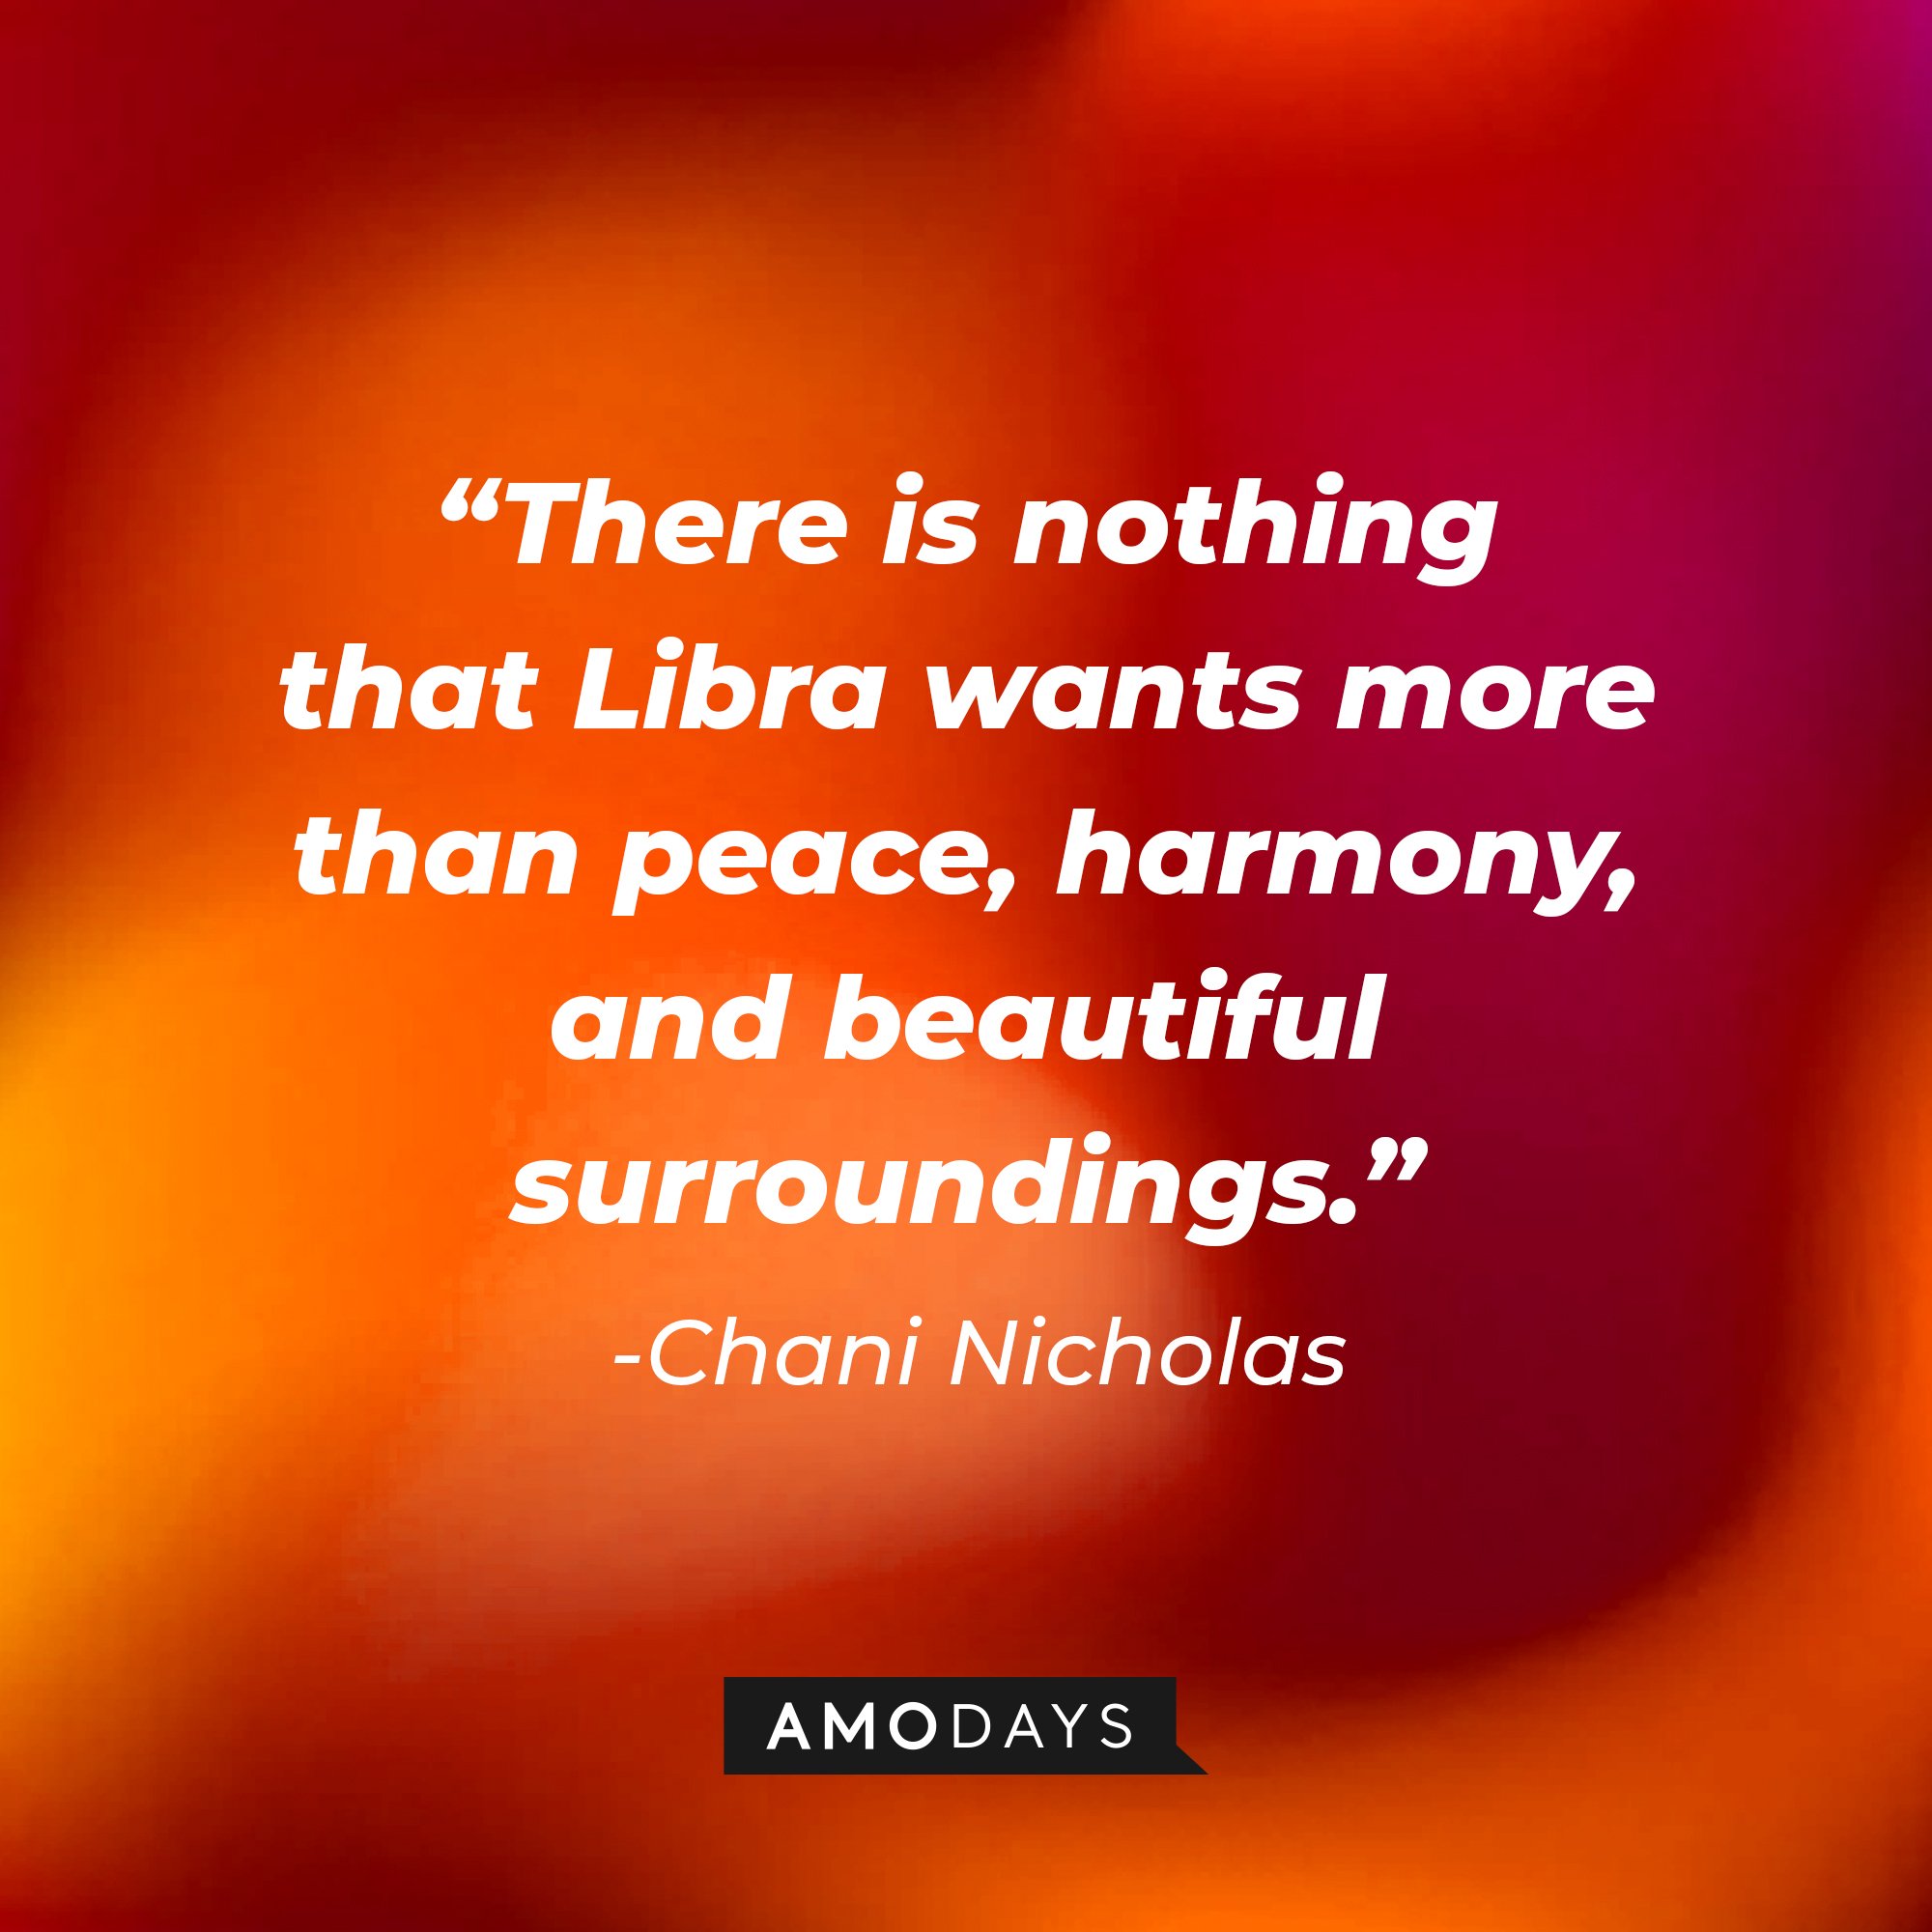 Chani Nicholas' quote: "There is nothing that Libra wants more than peace, harmony, and beautiful surroundings." | Image: AmoDays